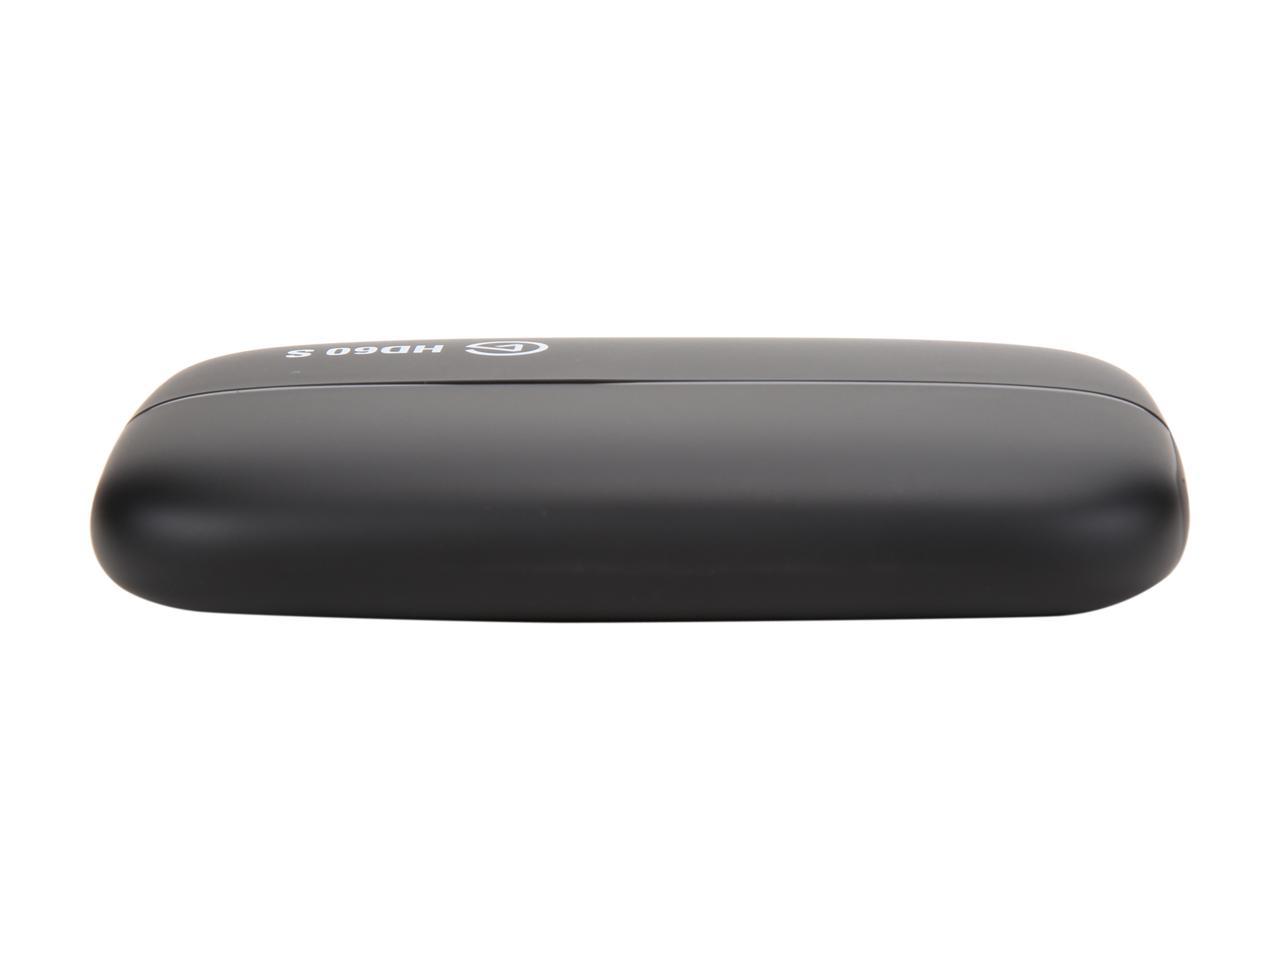 Elgato Game Capture HD60 S - Stream, Record and Share Your Gameplay in 1080p 60 FPS, Superior Low Latency Technology, USB 3.0, For PS4, Xbox One and Nintendo Switch